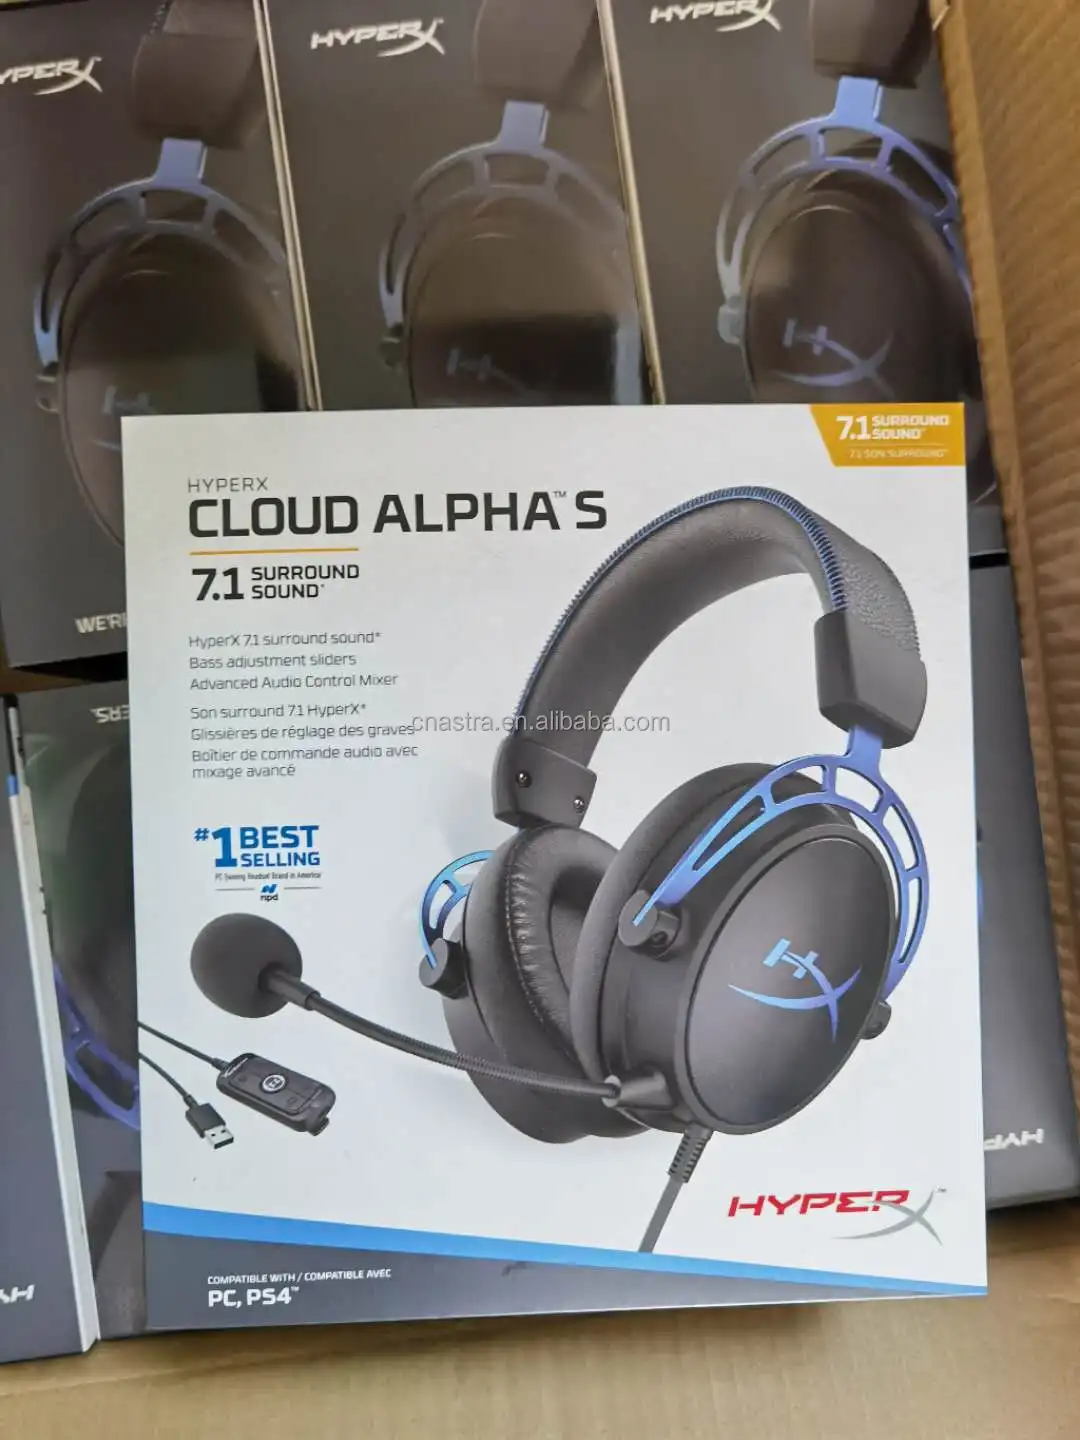 2021 Hyper X Cloud Alpha S 7.1 Surround Sound Gaming Headphones Wired 3.5Mm Headset For Computer PC PS4 From m.alibaba.com